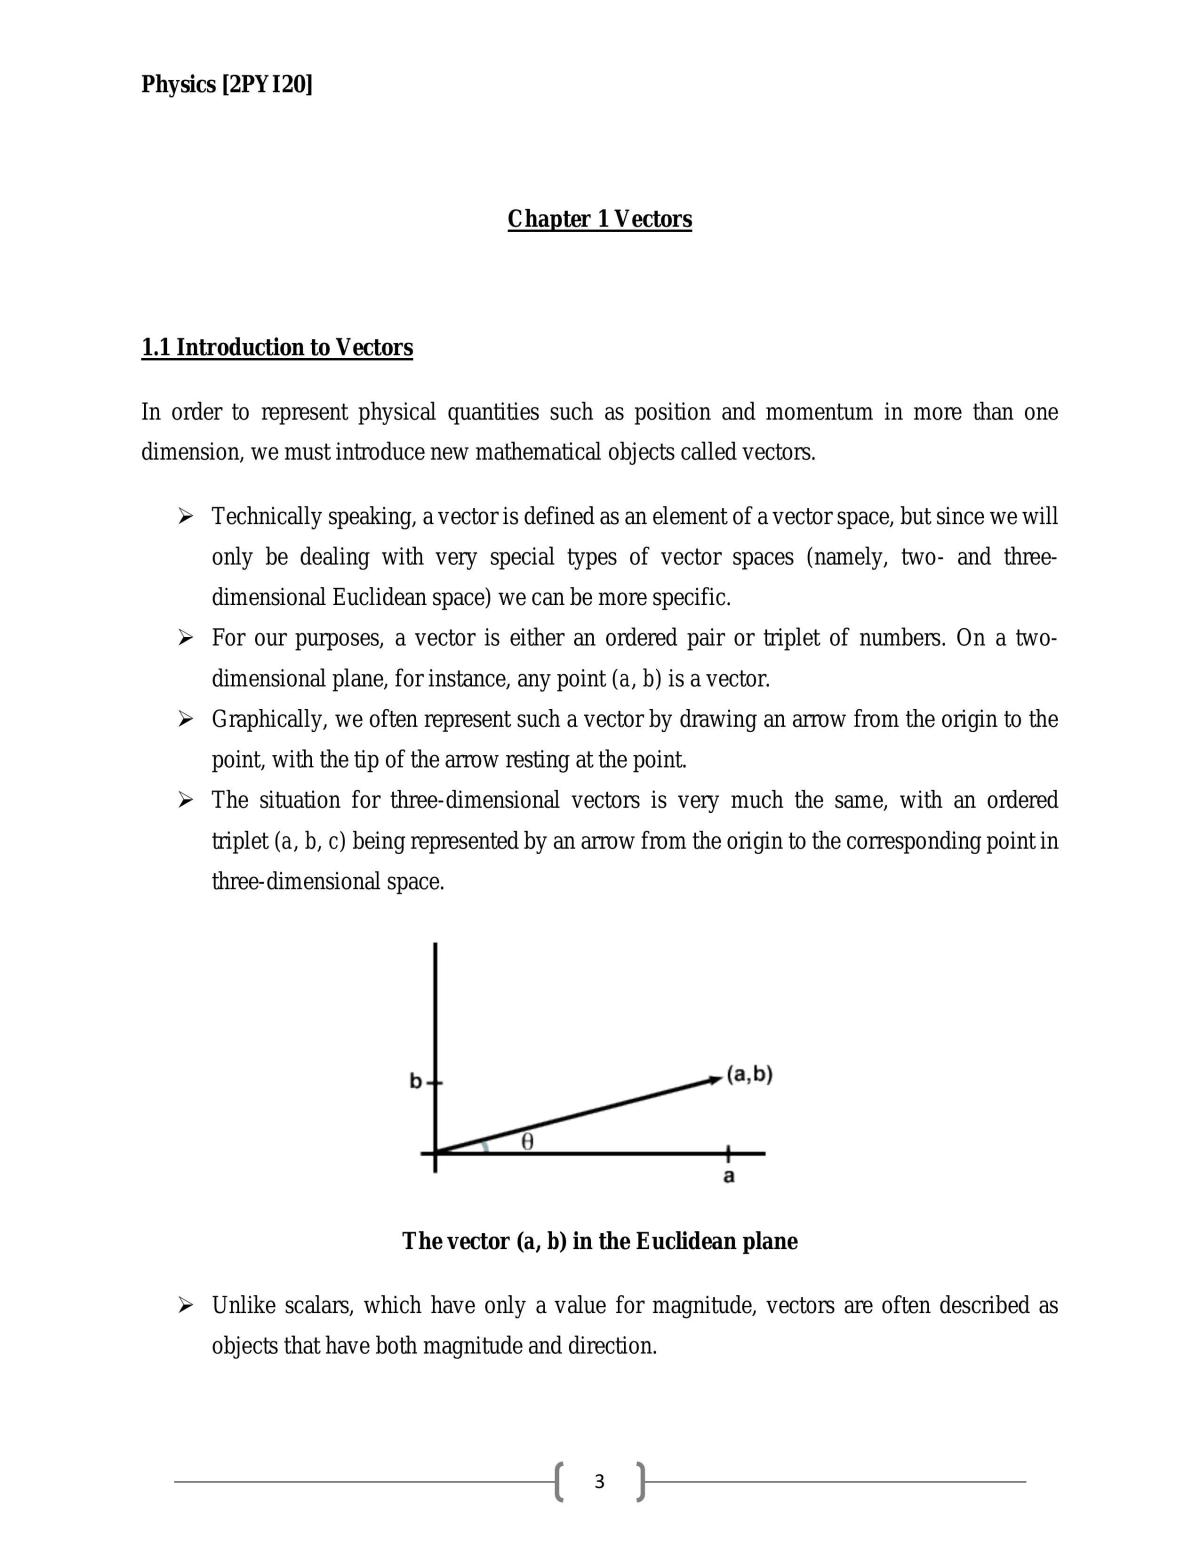 Physics Studies Notes - Page 3